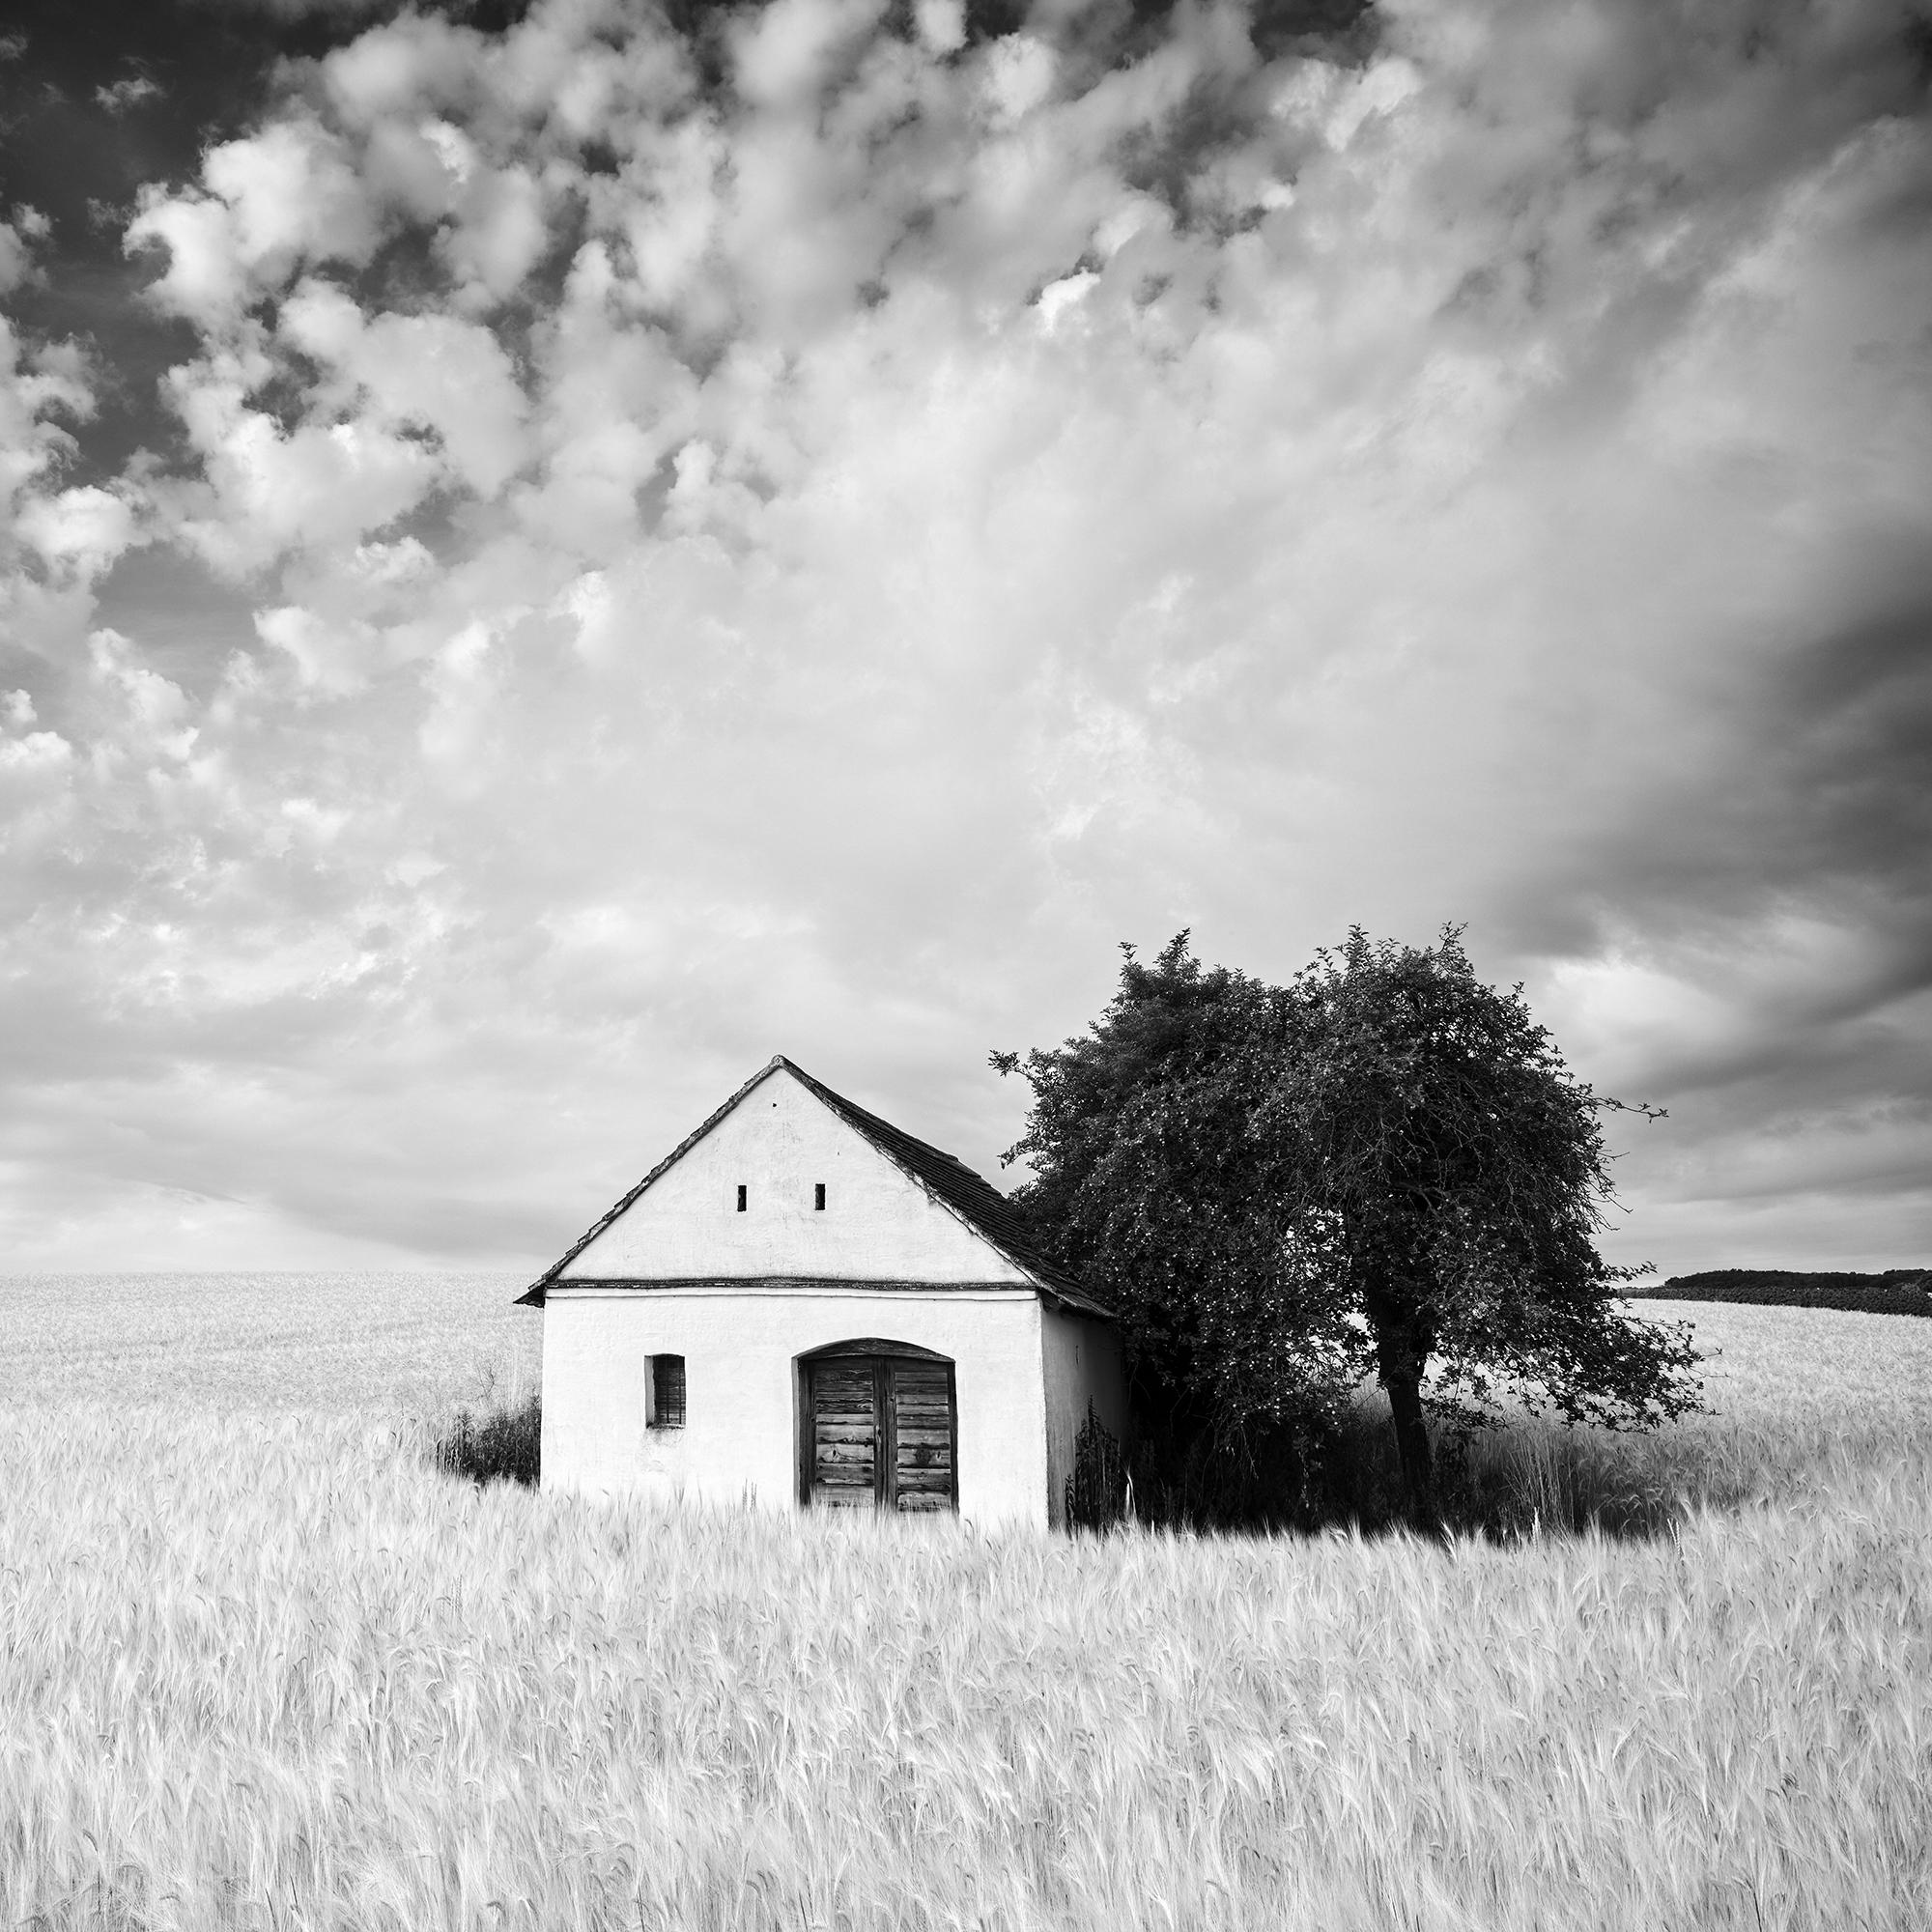 Wine Press House, Cornfield, Tree, black and white landscape art photography  For Sale 4